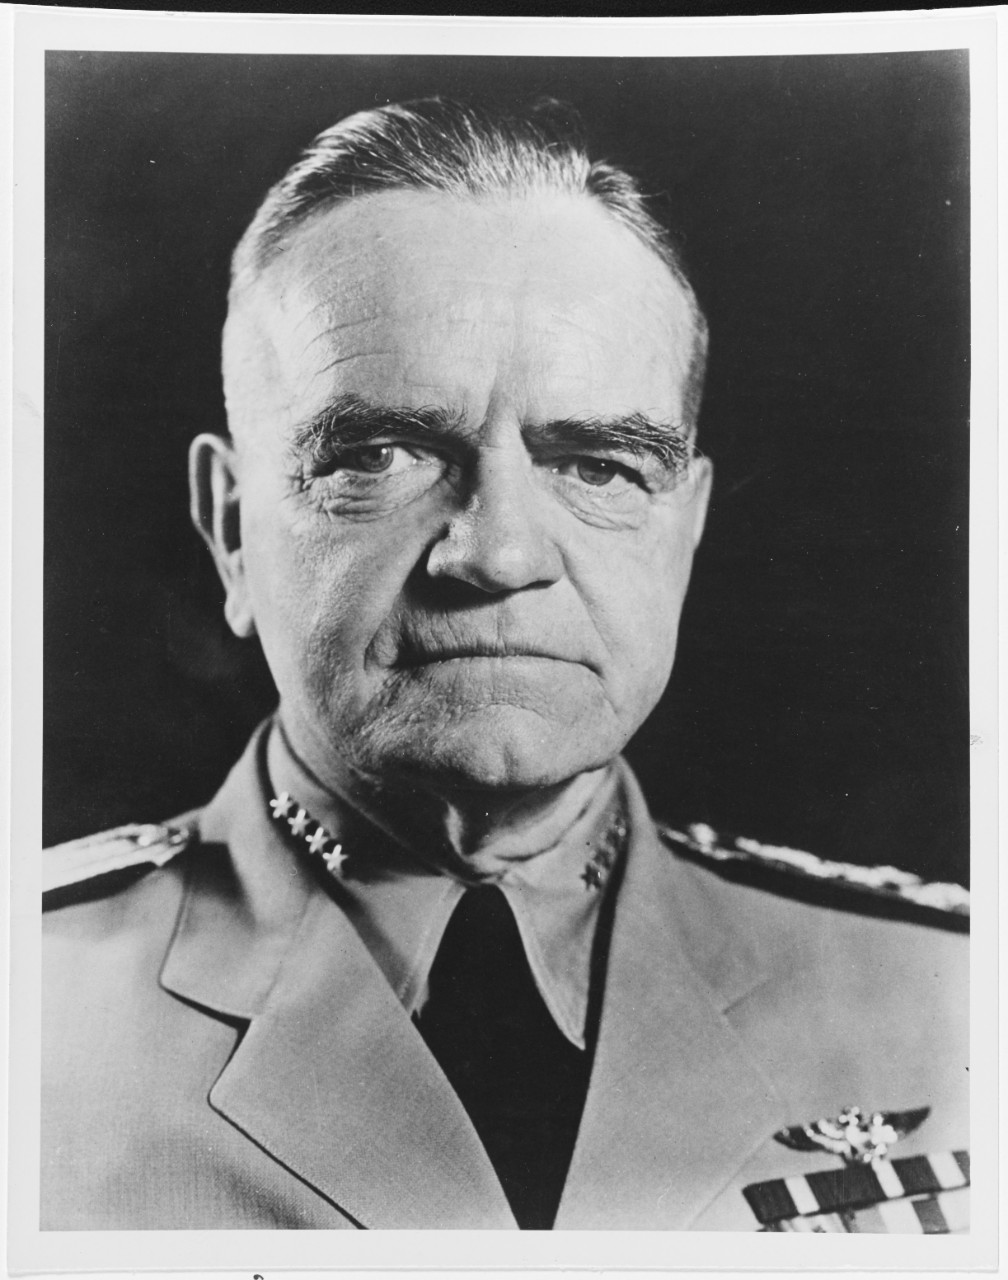 Admiral William F. Halsey, USN. Photographed in 1942-1945